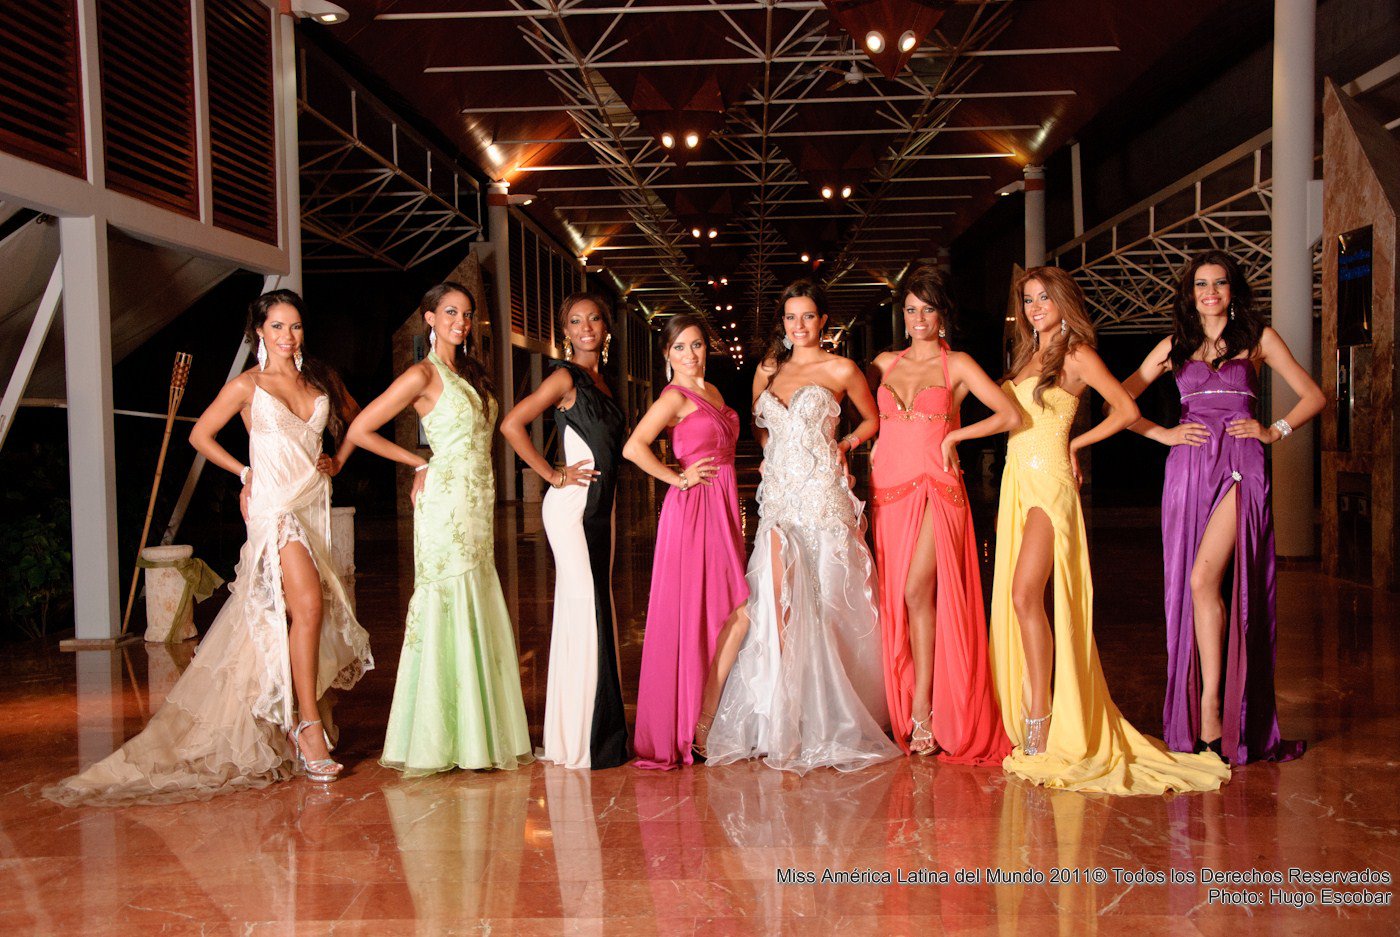 Miss Latin America of the World 2011 competition - Europe and Asia division